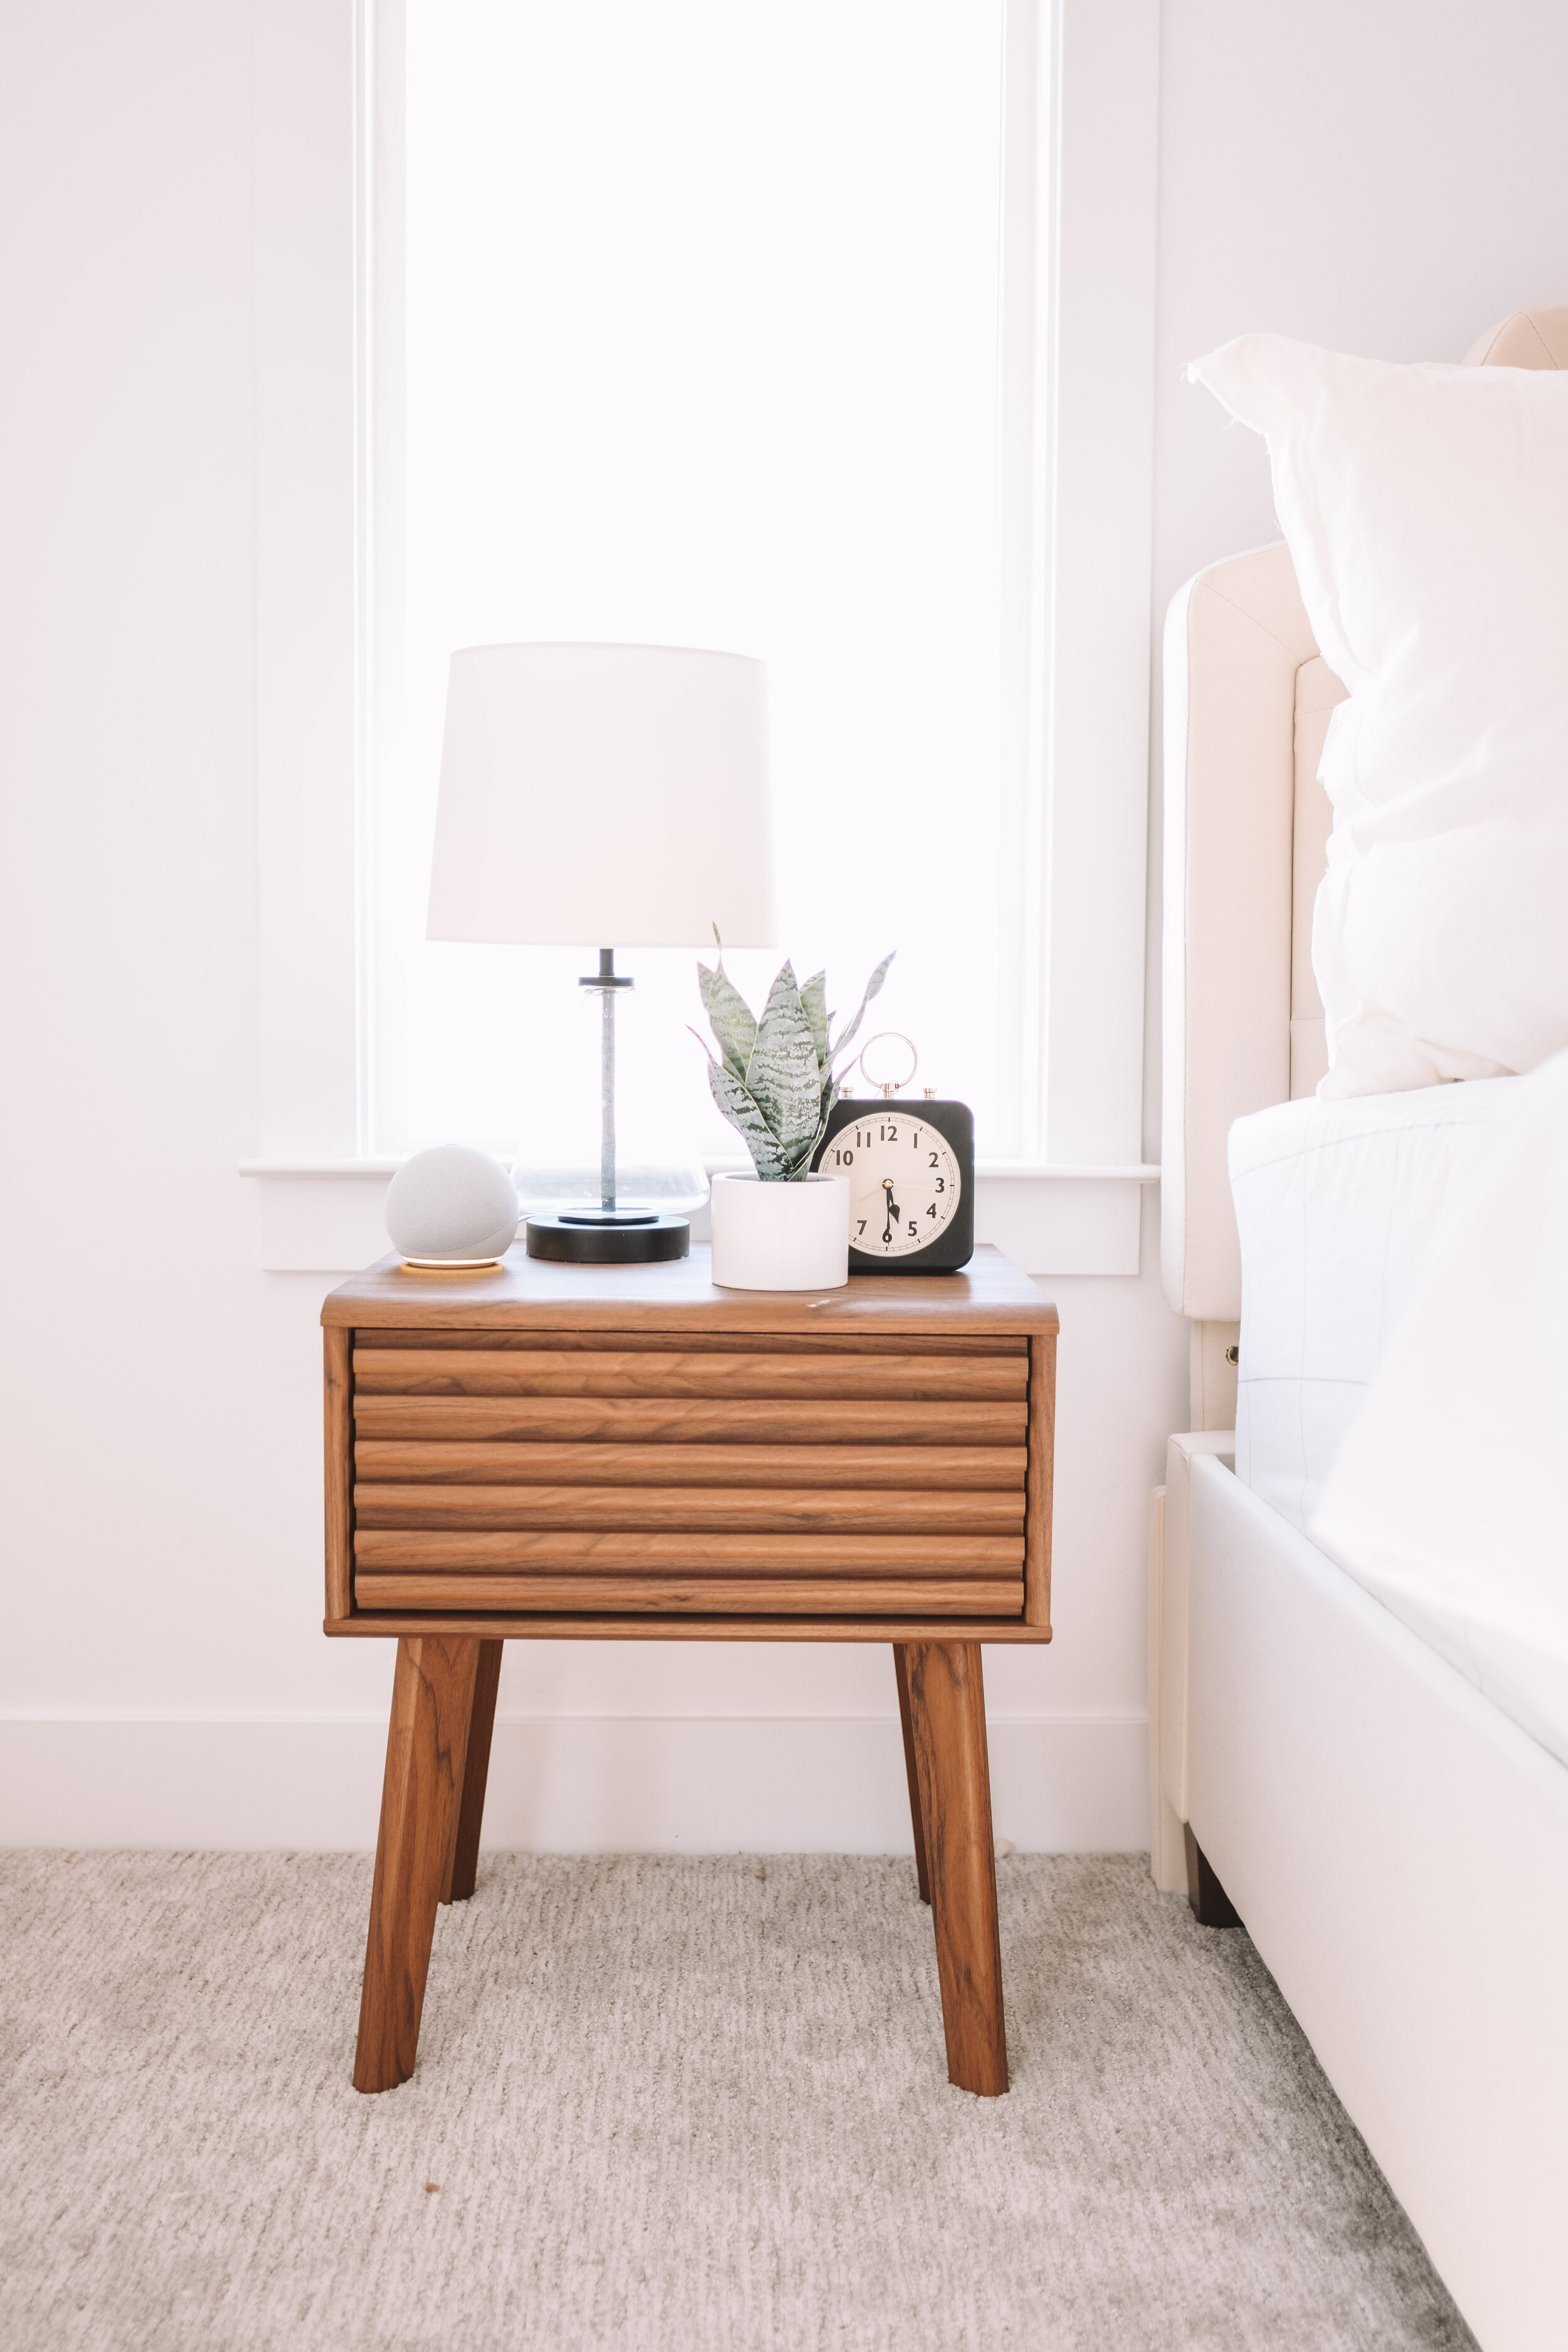 Wood Nighstands + Nightstand Decor - The Overwhelmed Mommy